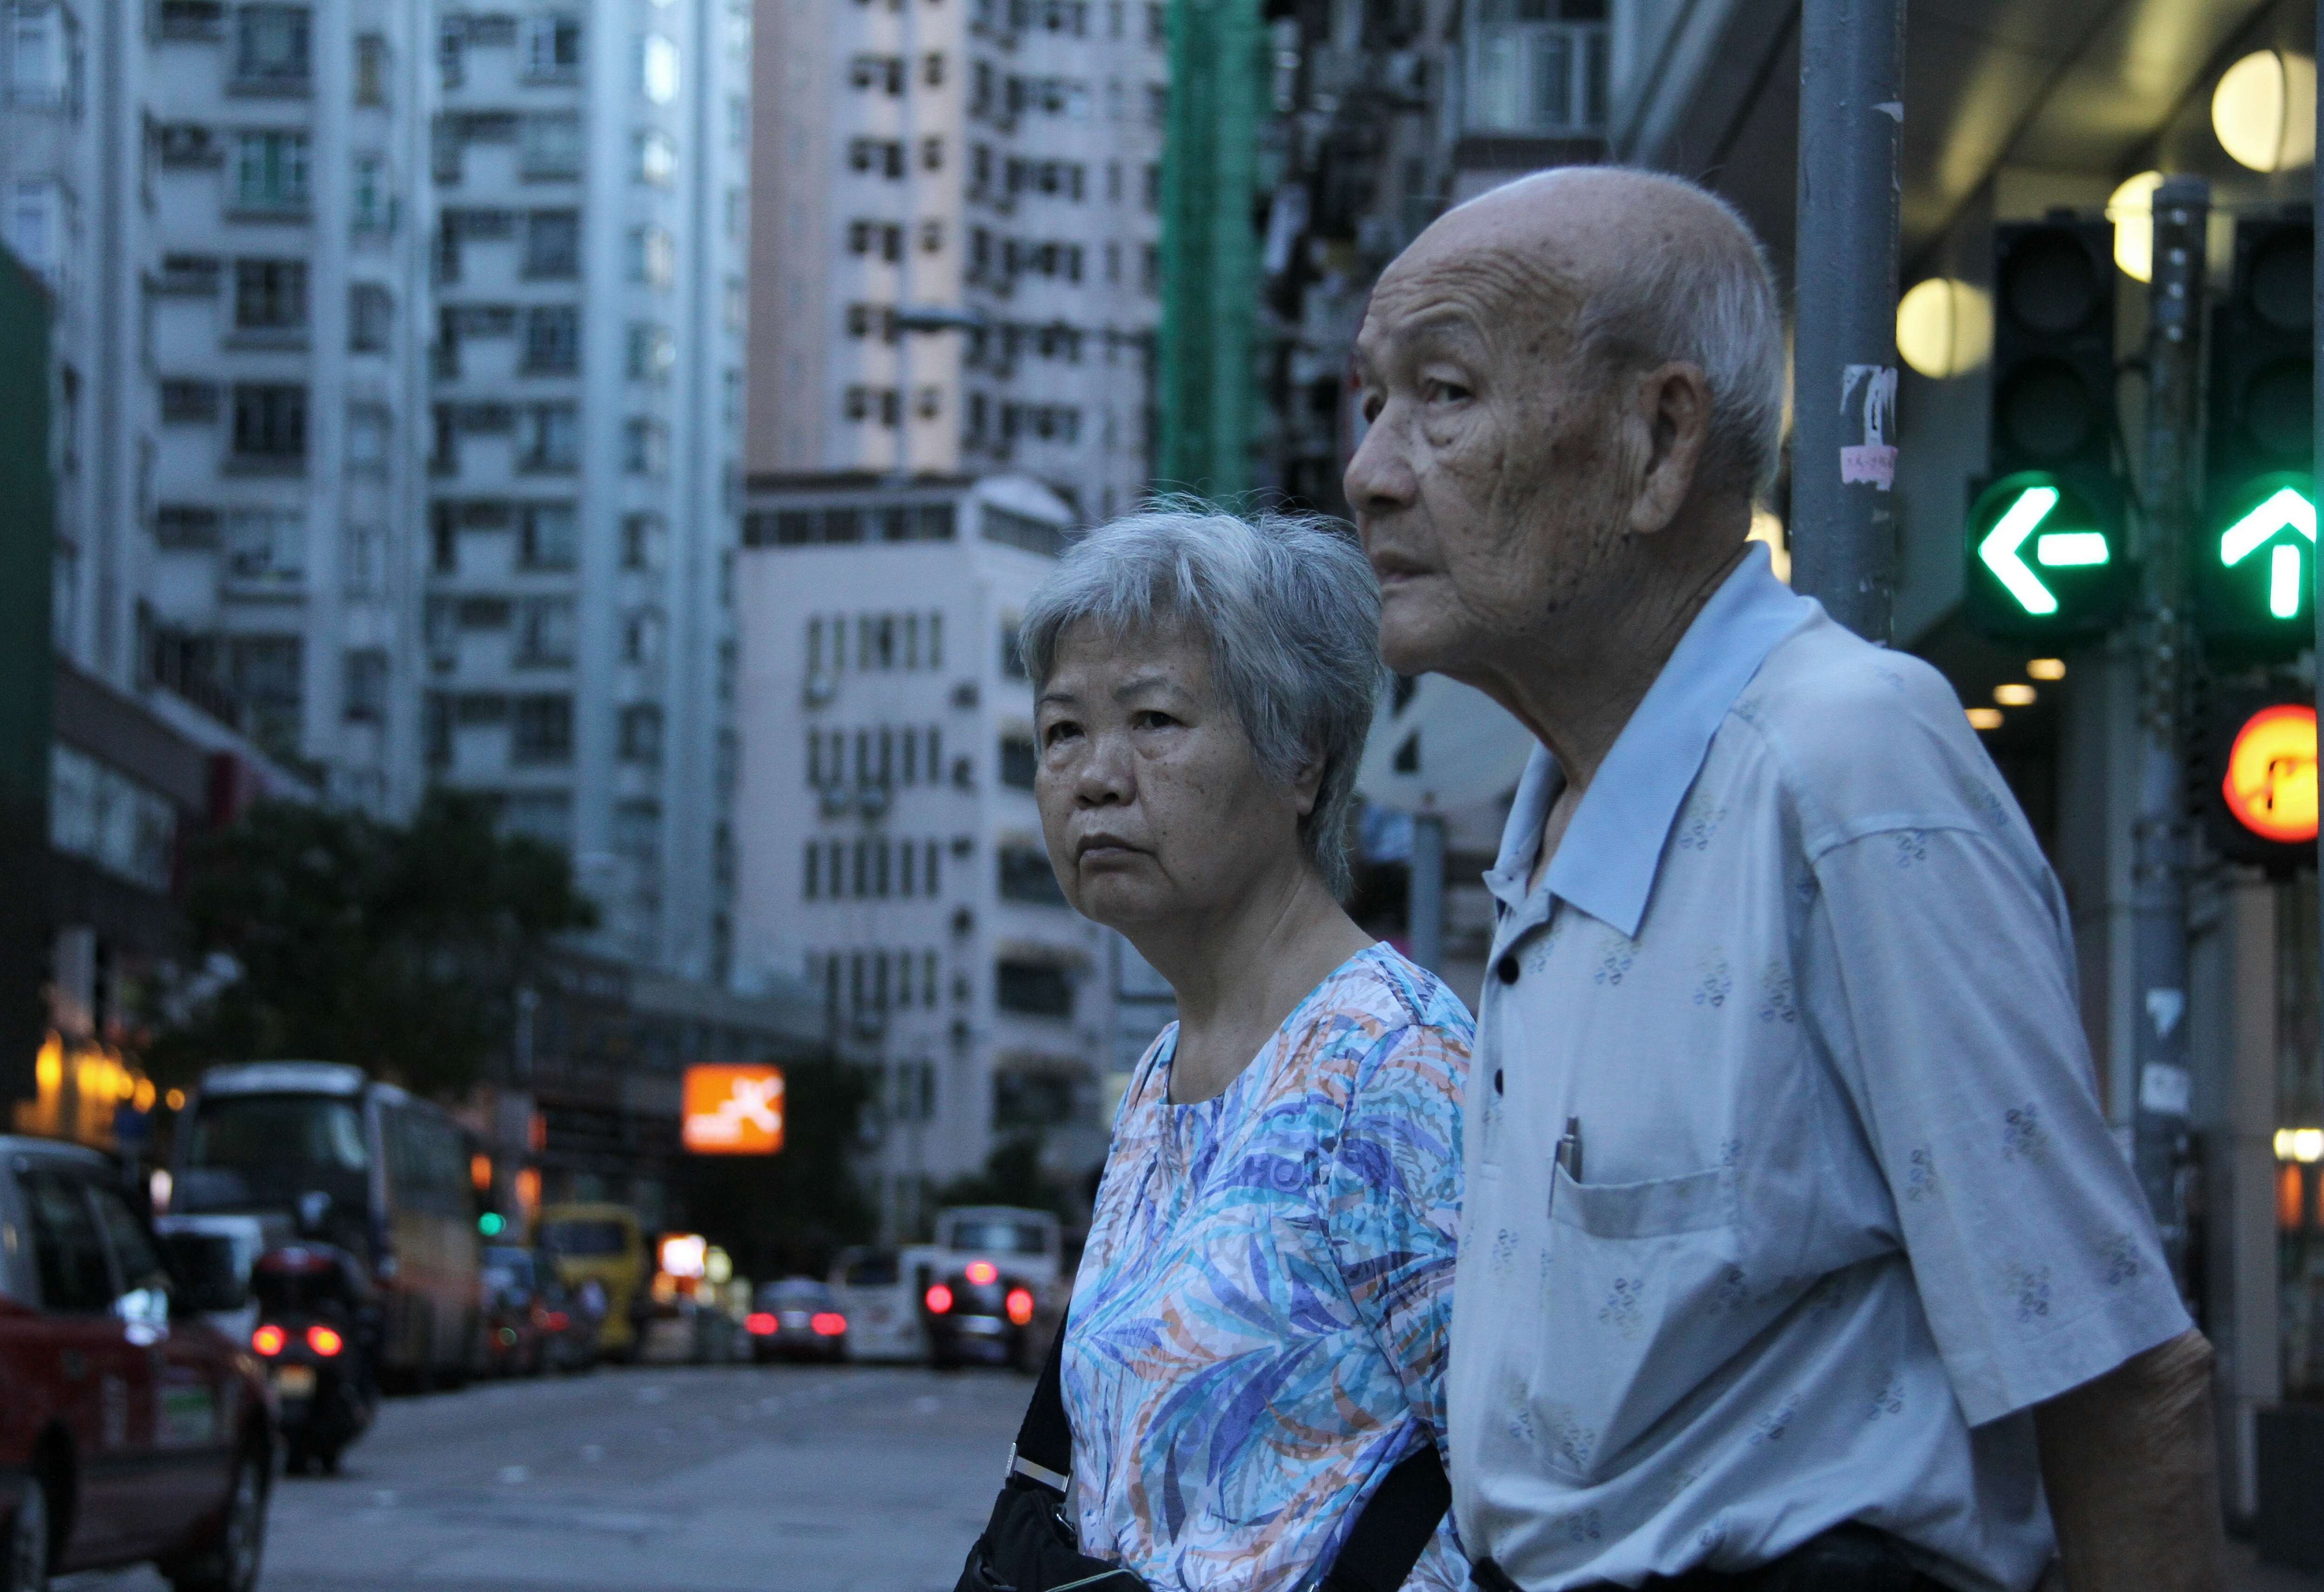 In Hong Kong, while the city’s population will grow from 6.8 million in 2003 to 8.38 million by 2033, the proportion of citizens aged 65 or above will grow dramatically, from 11 per cent to 27 per cent over the same period. Photo: Xinhua